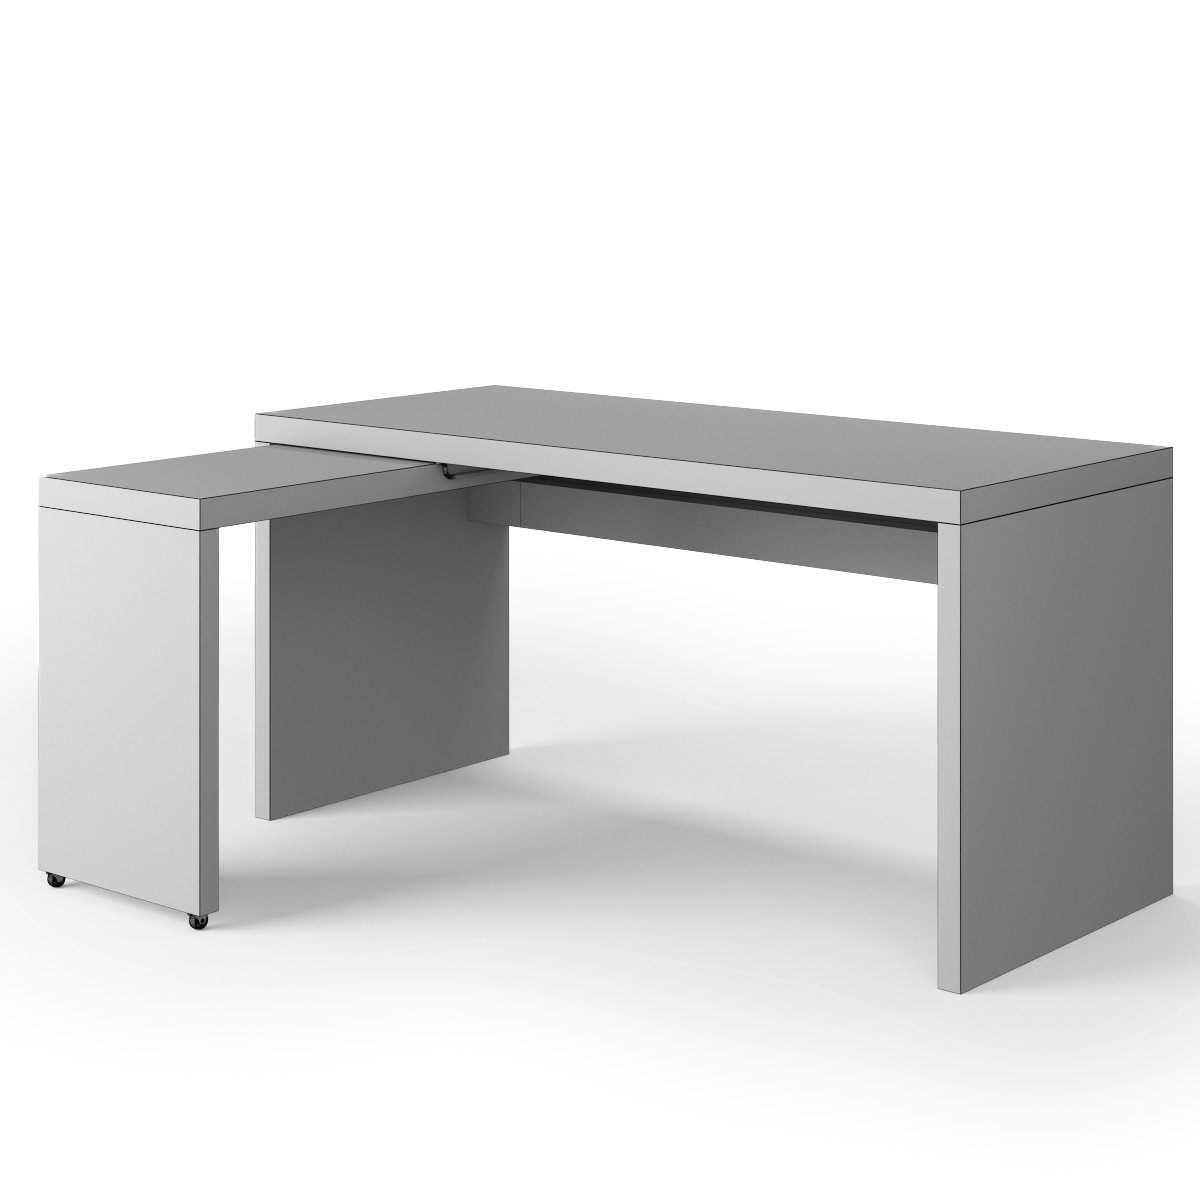 Ikea Malm Desk With Pull Out Panel 3d Model In Table 3dexport